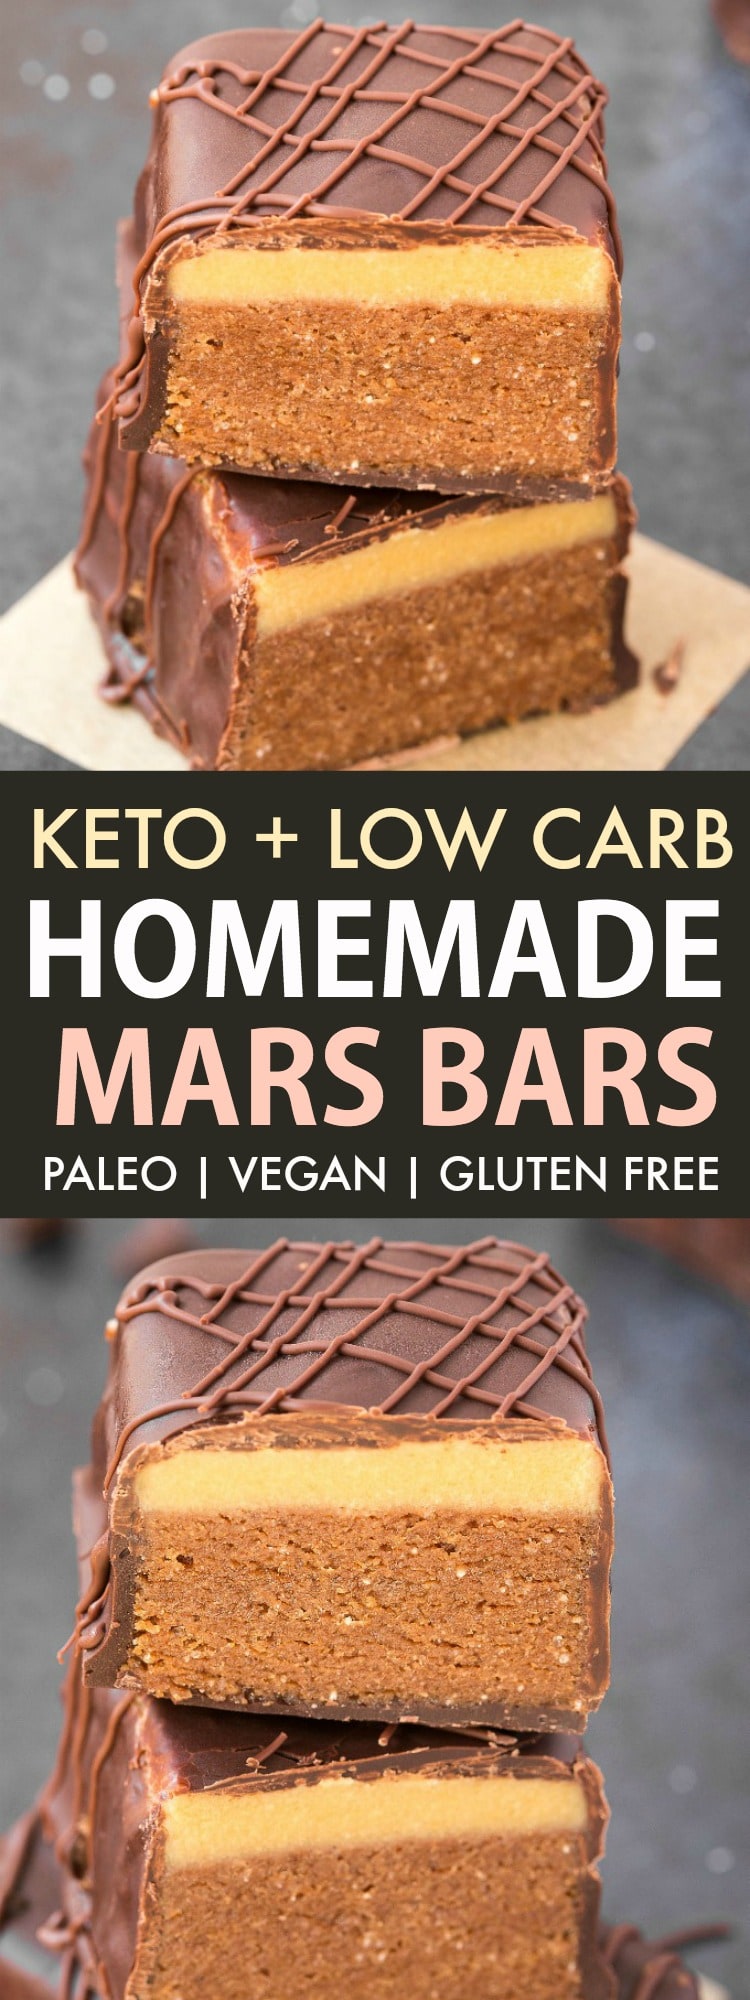 homemade mars bars recipe that is healthy, no bake and with a keto and paleo nougat filling.